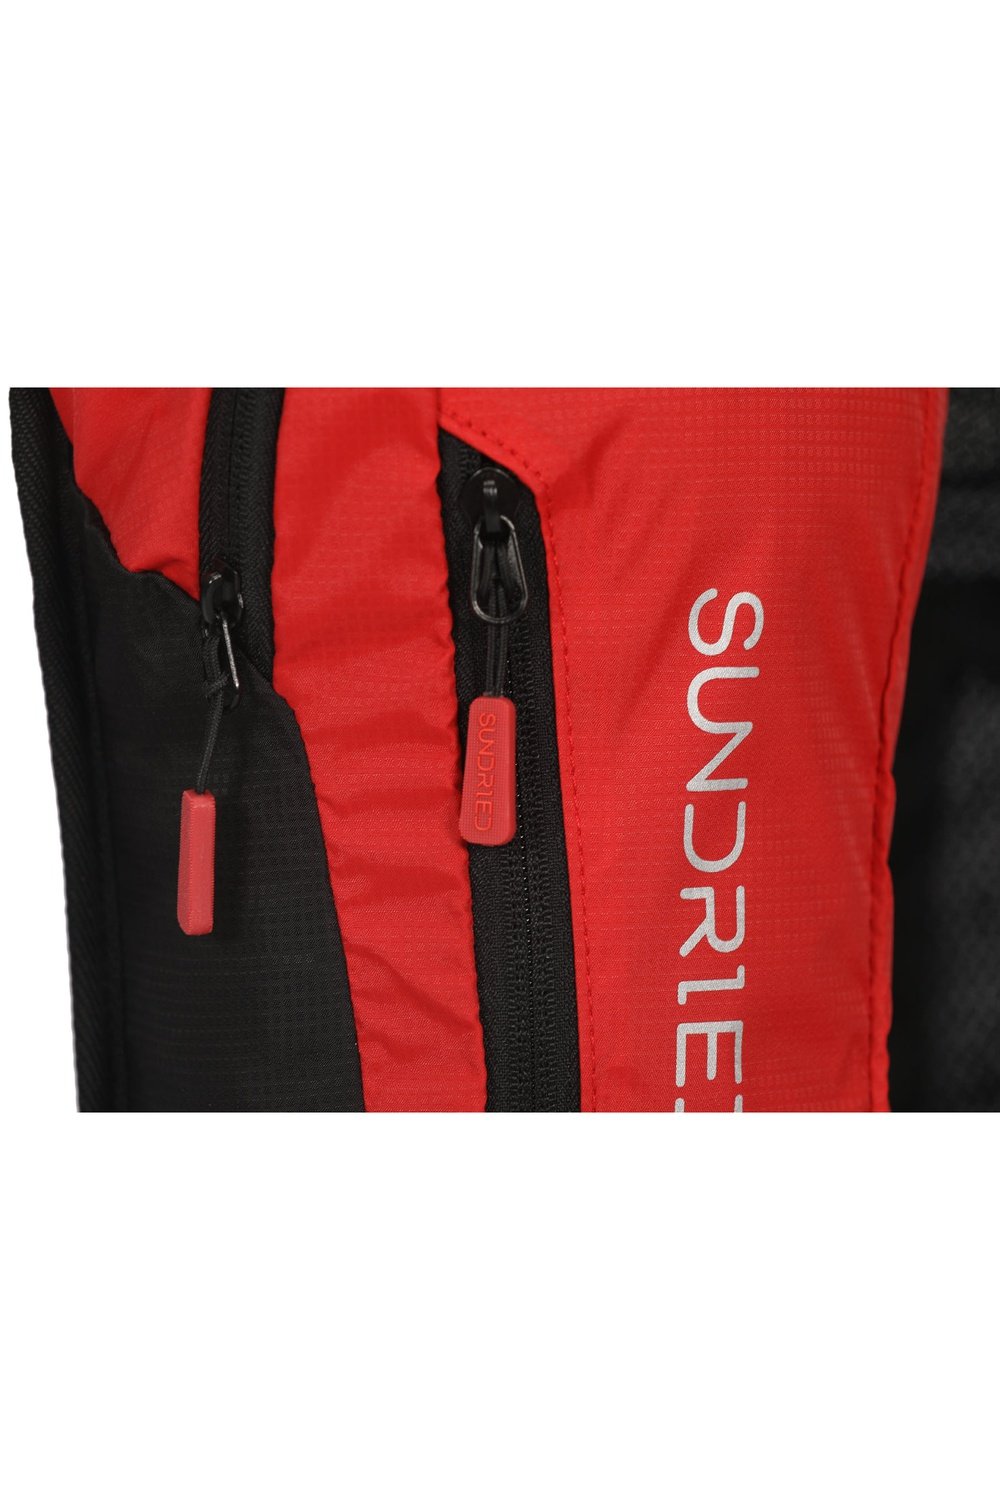 Sundried Hydration Backpack Red Bags SD0401 Activewear